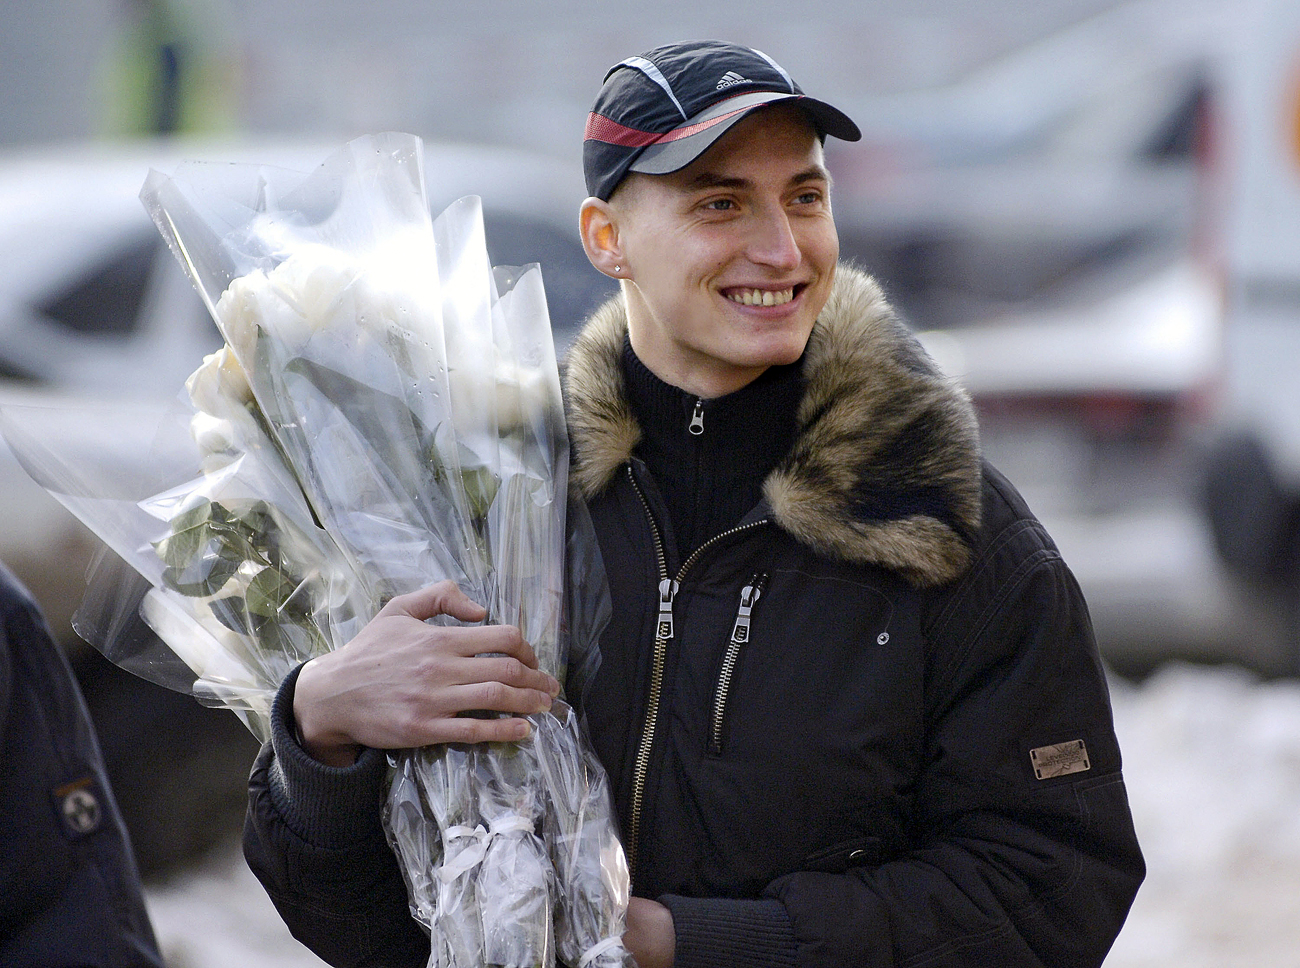 Men buy flowers on the eve of March 8, International Women's Day.